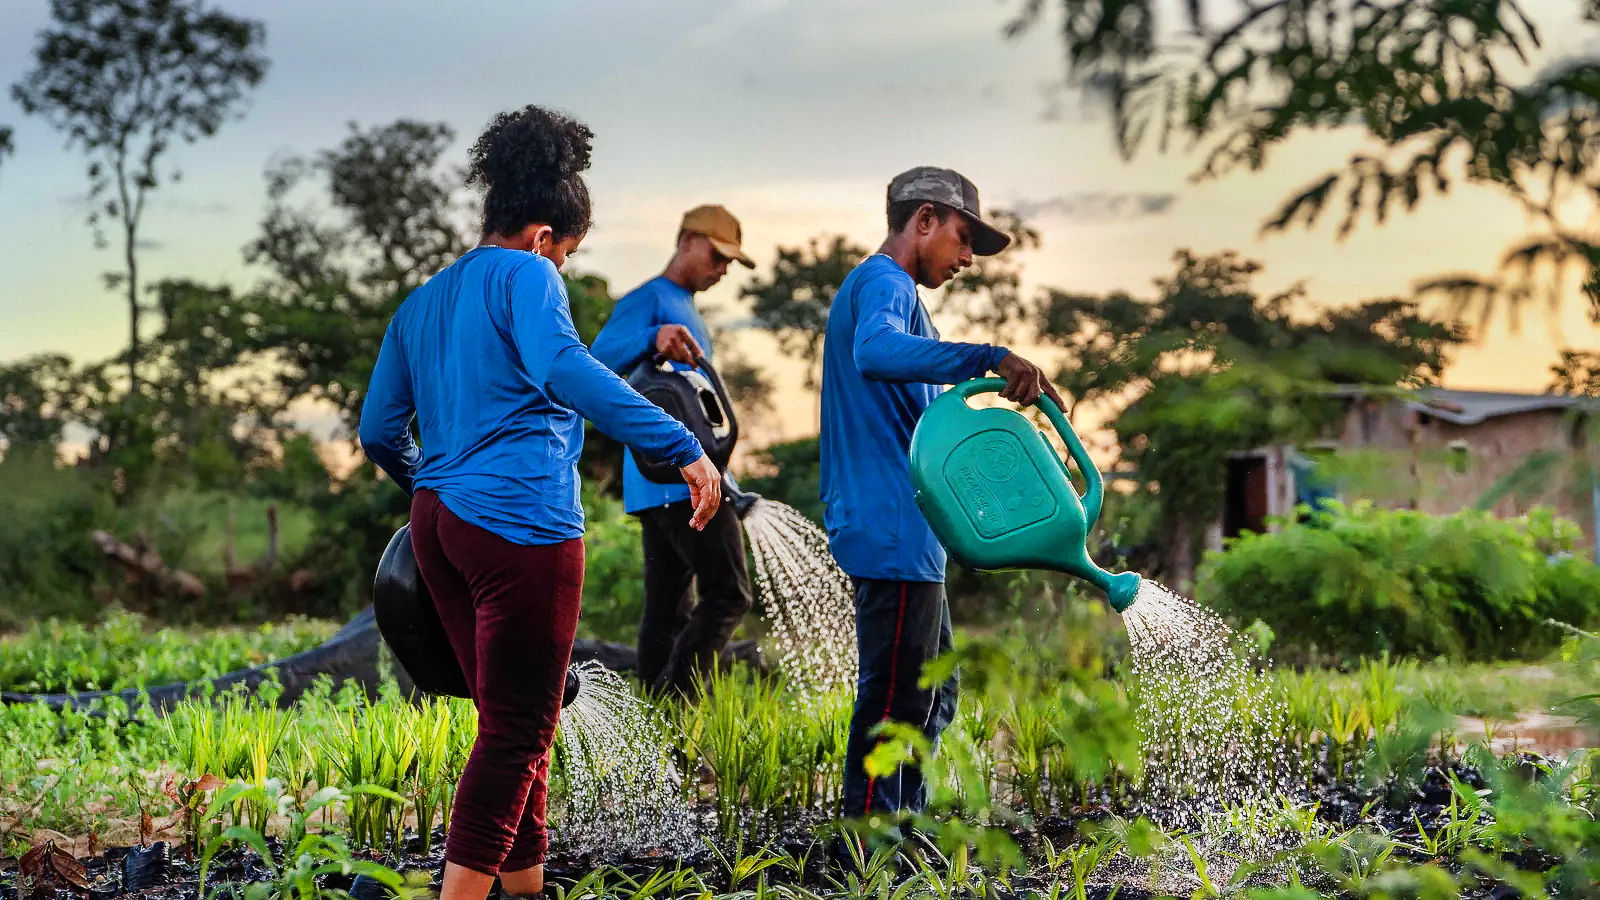 Eden Reforestation Projects: The Eden team watering seedlings at the Parnaguá nursery.